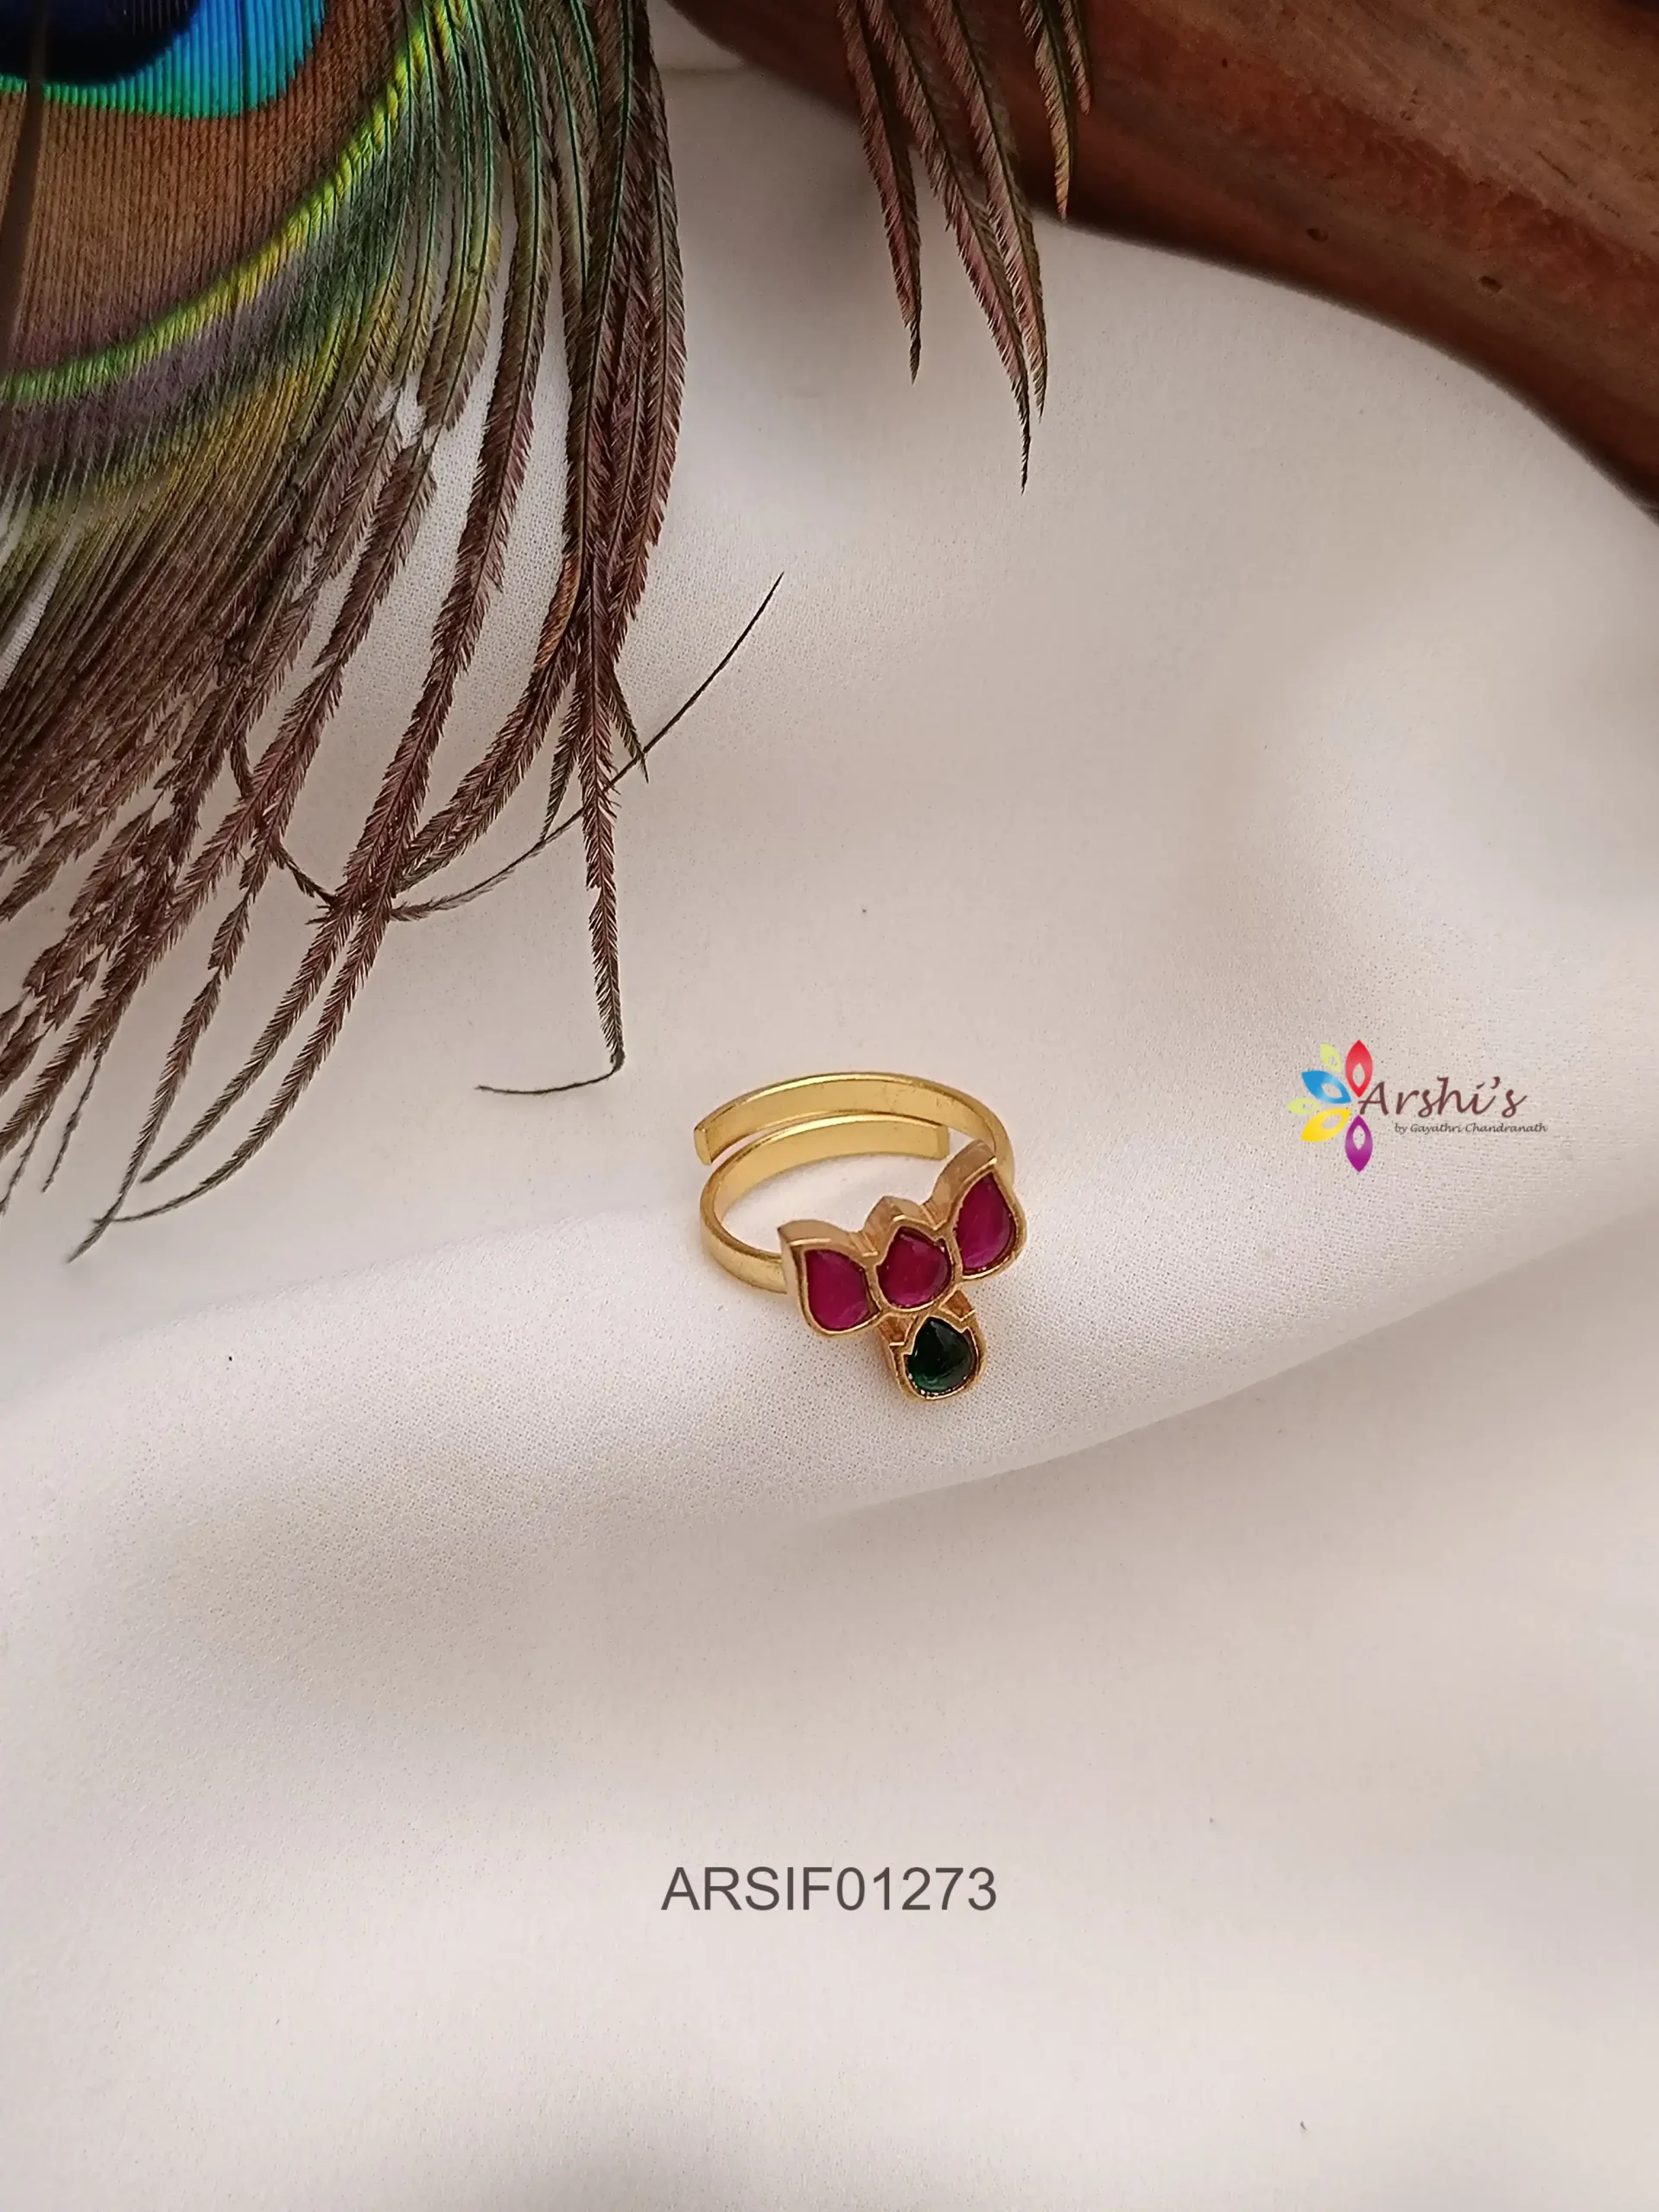 CZ,Ruby Stones,2 Layer Oval Flower Design Gold Finished Premium Quality Finger  Ring Buy Online